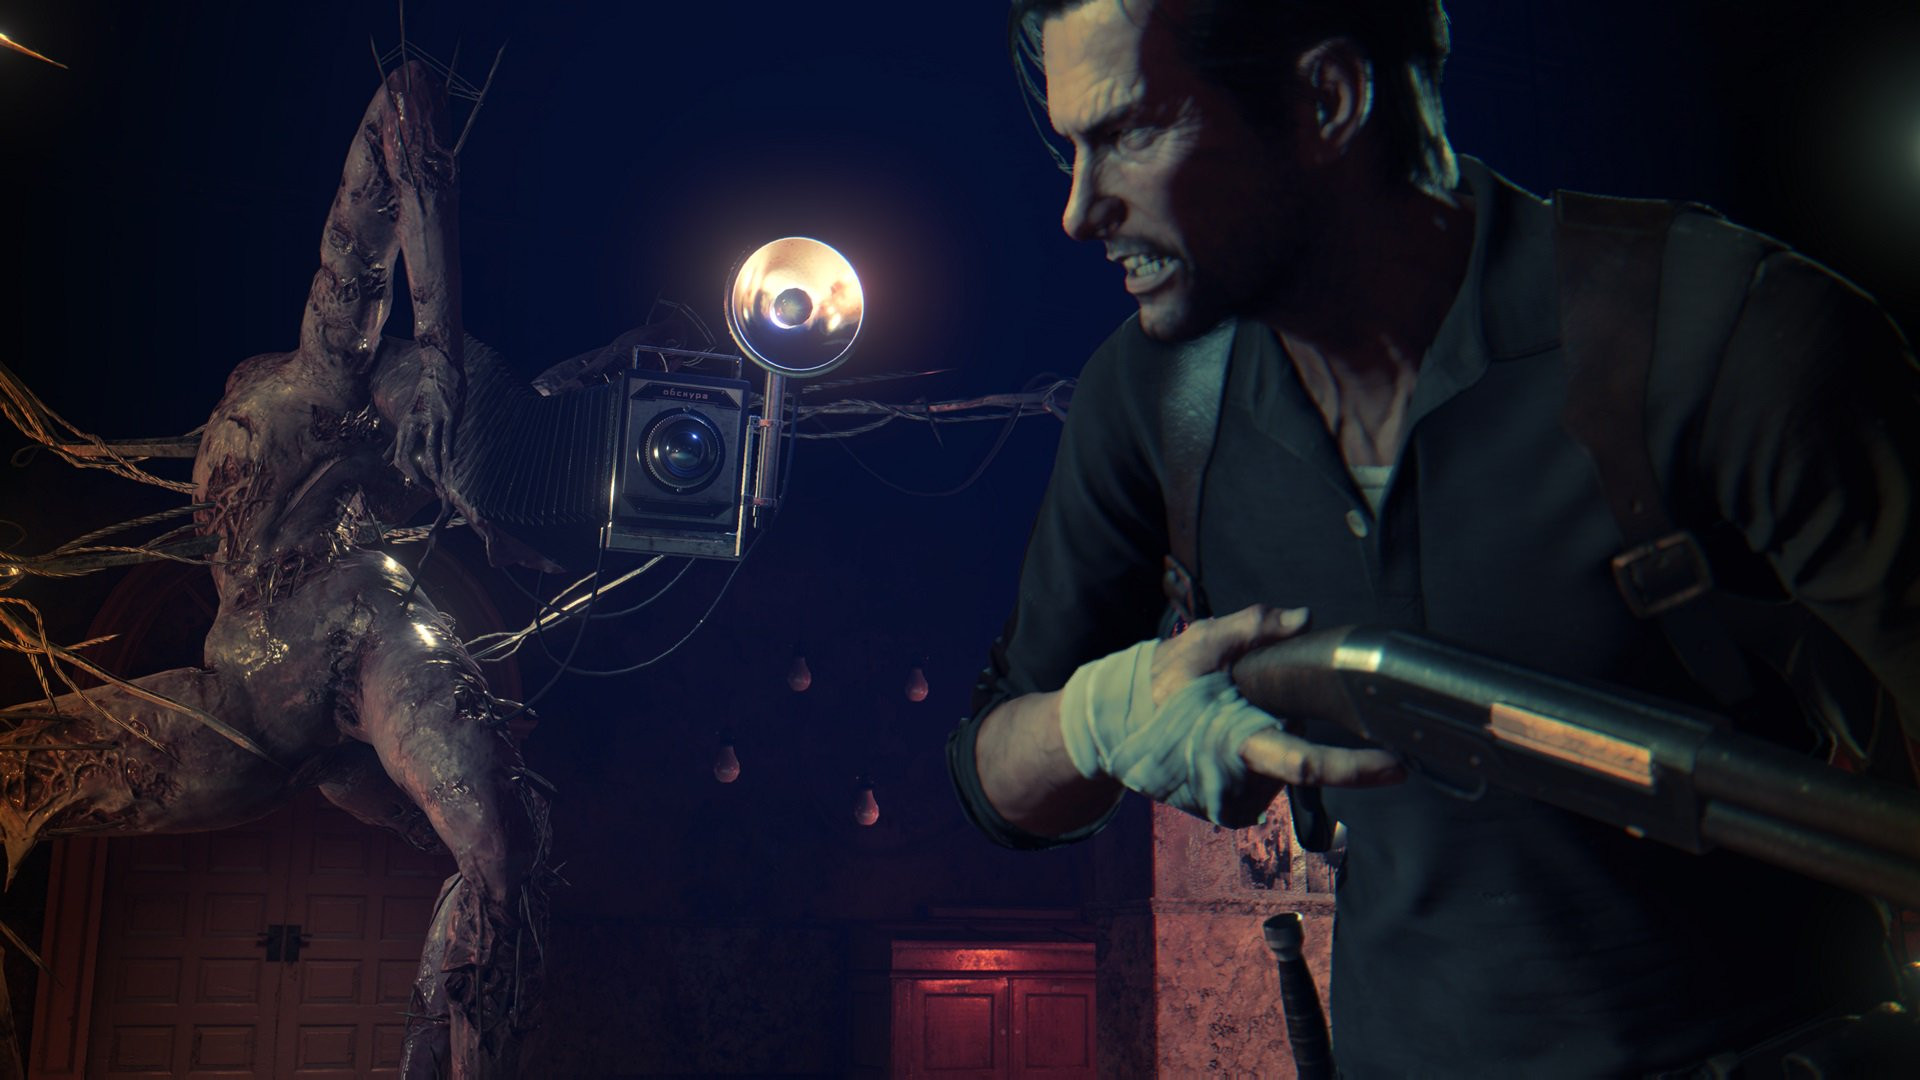 The Evil Within 2 XBOX ONE / XBOX SERIES X|S Key   🔑